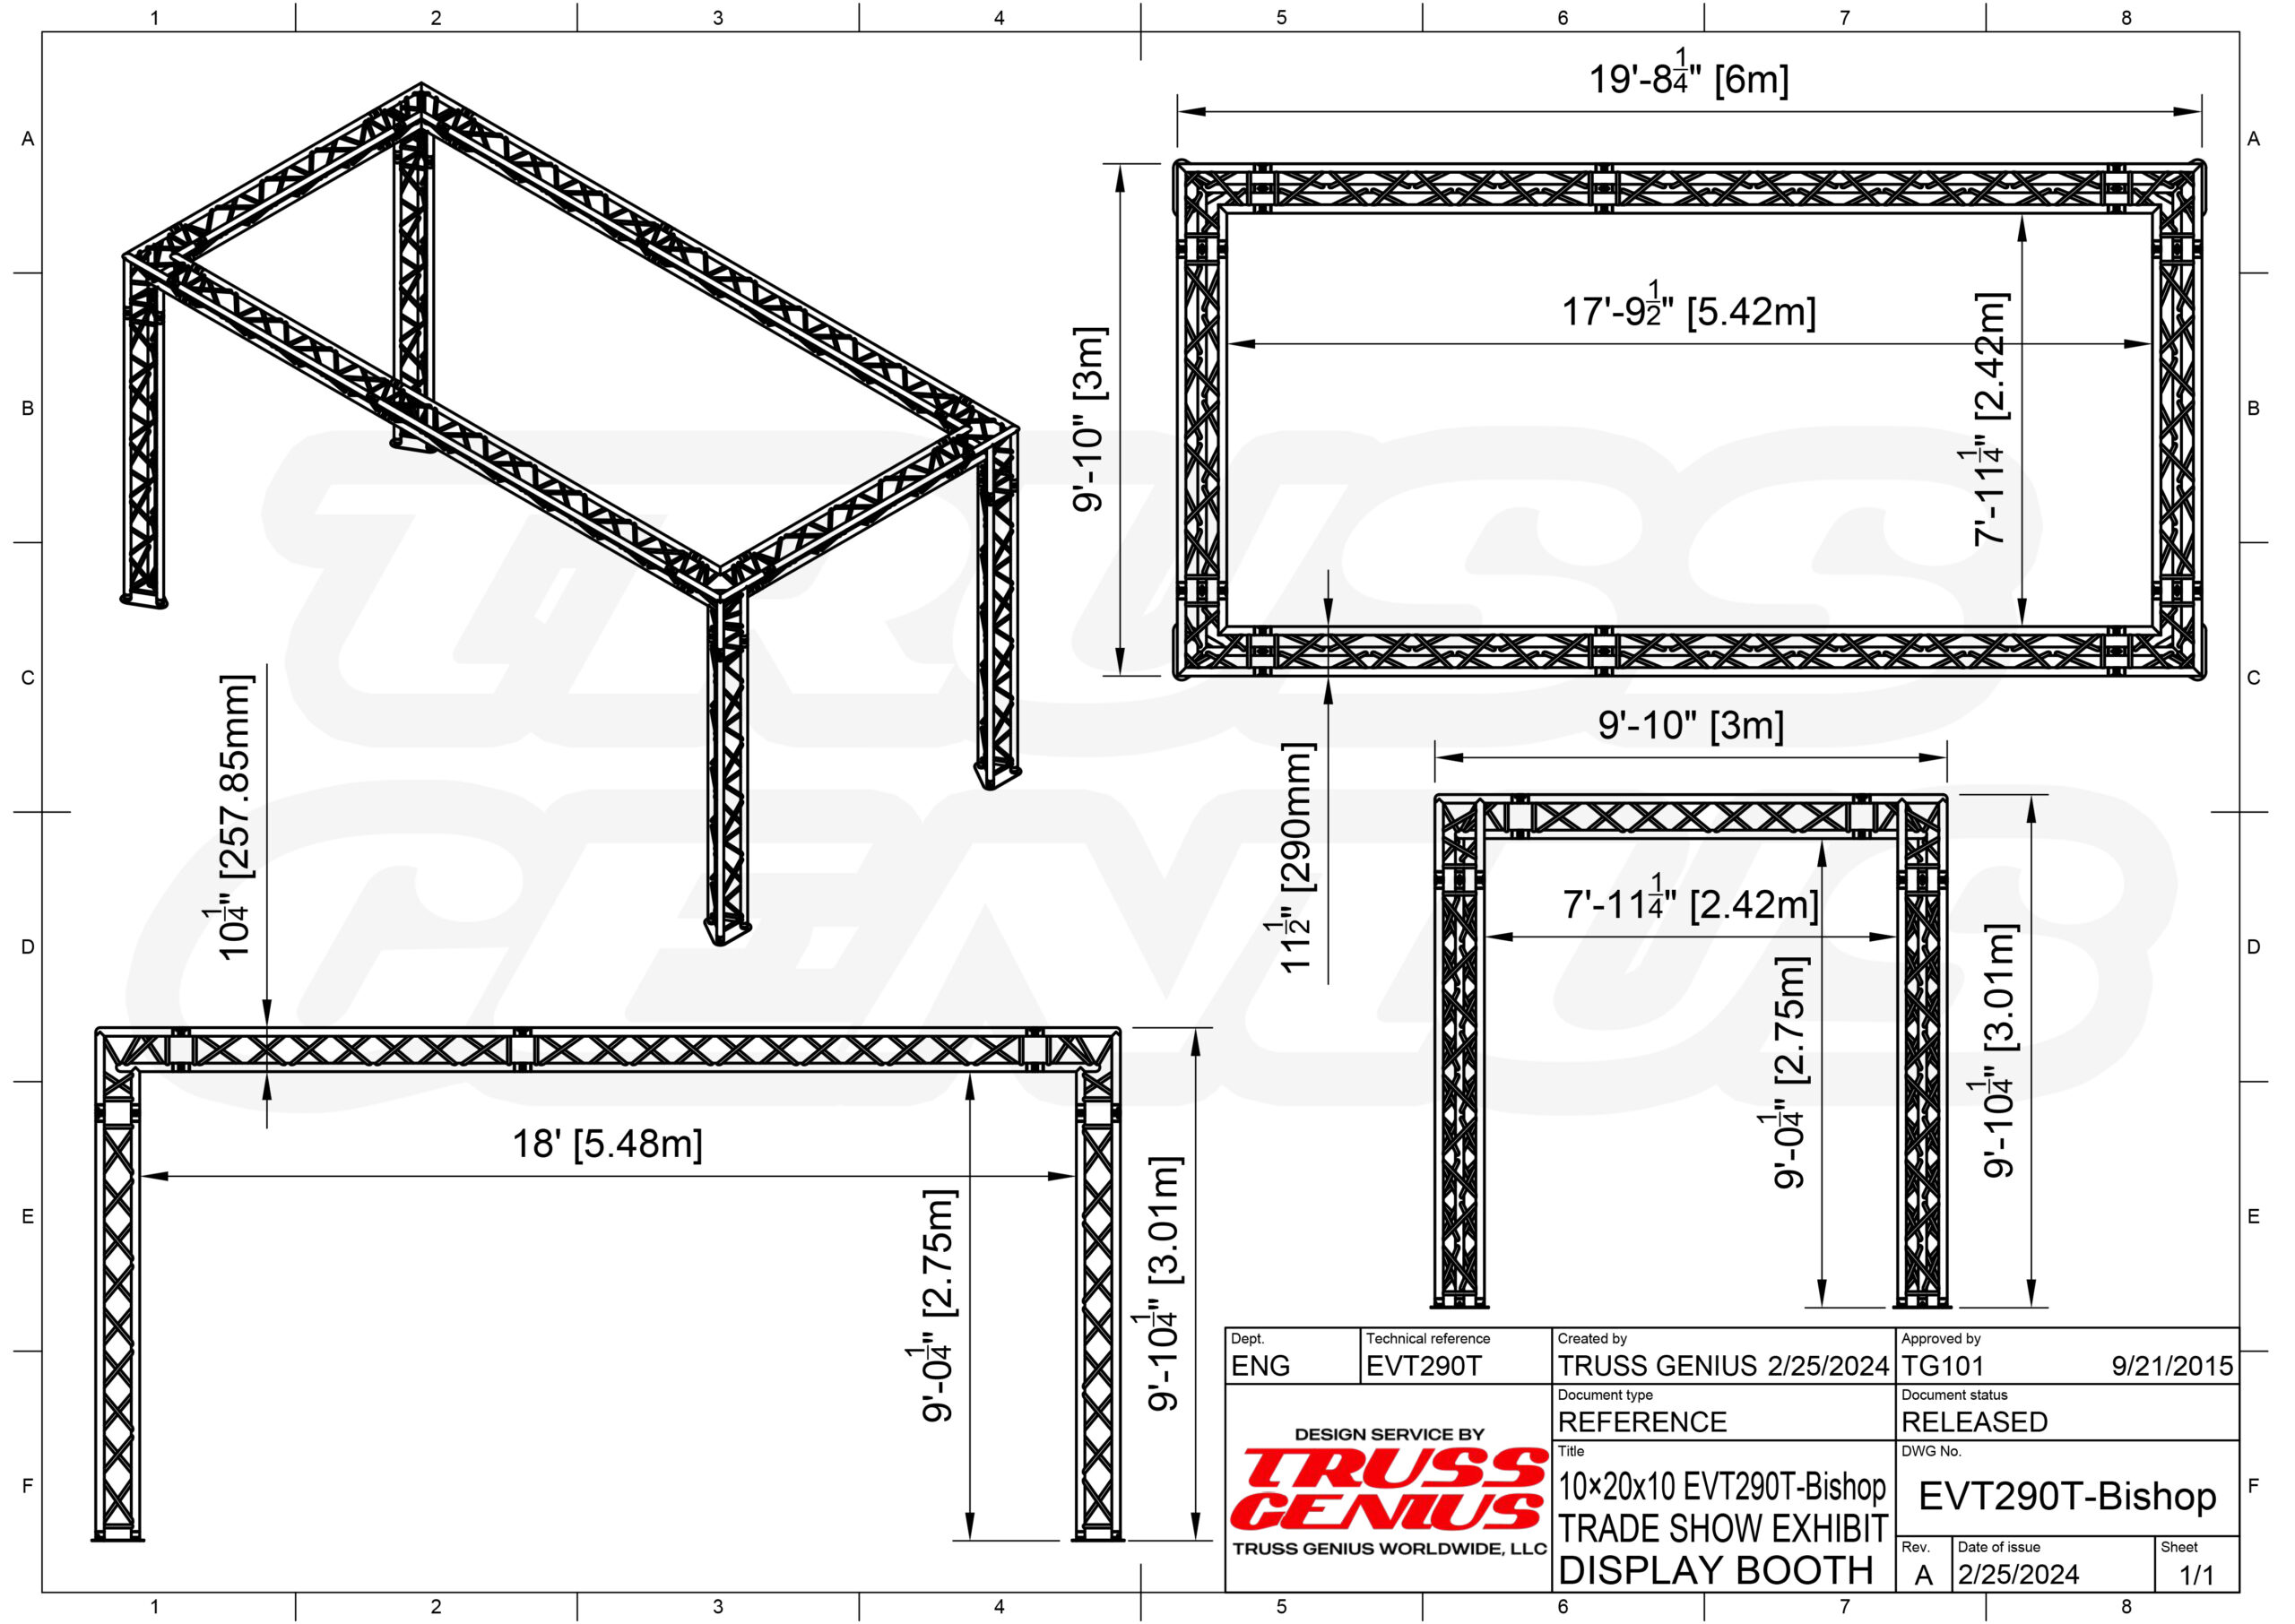 10×20 Trade Show Exhibit Display Booth EVT290T-Bishop Drawing